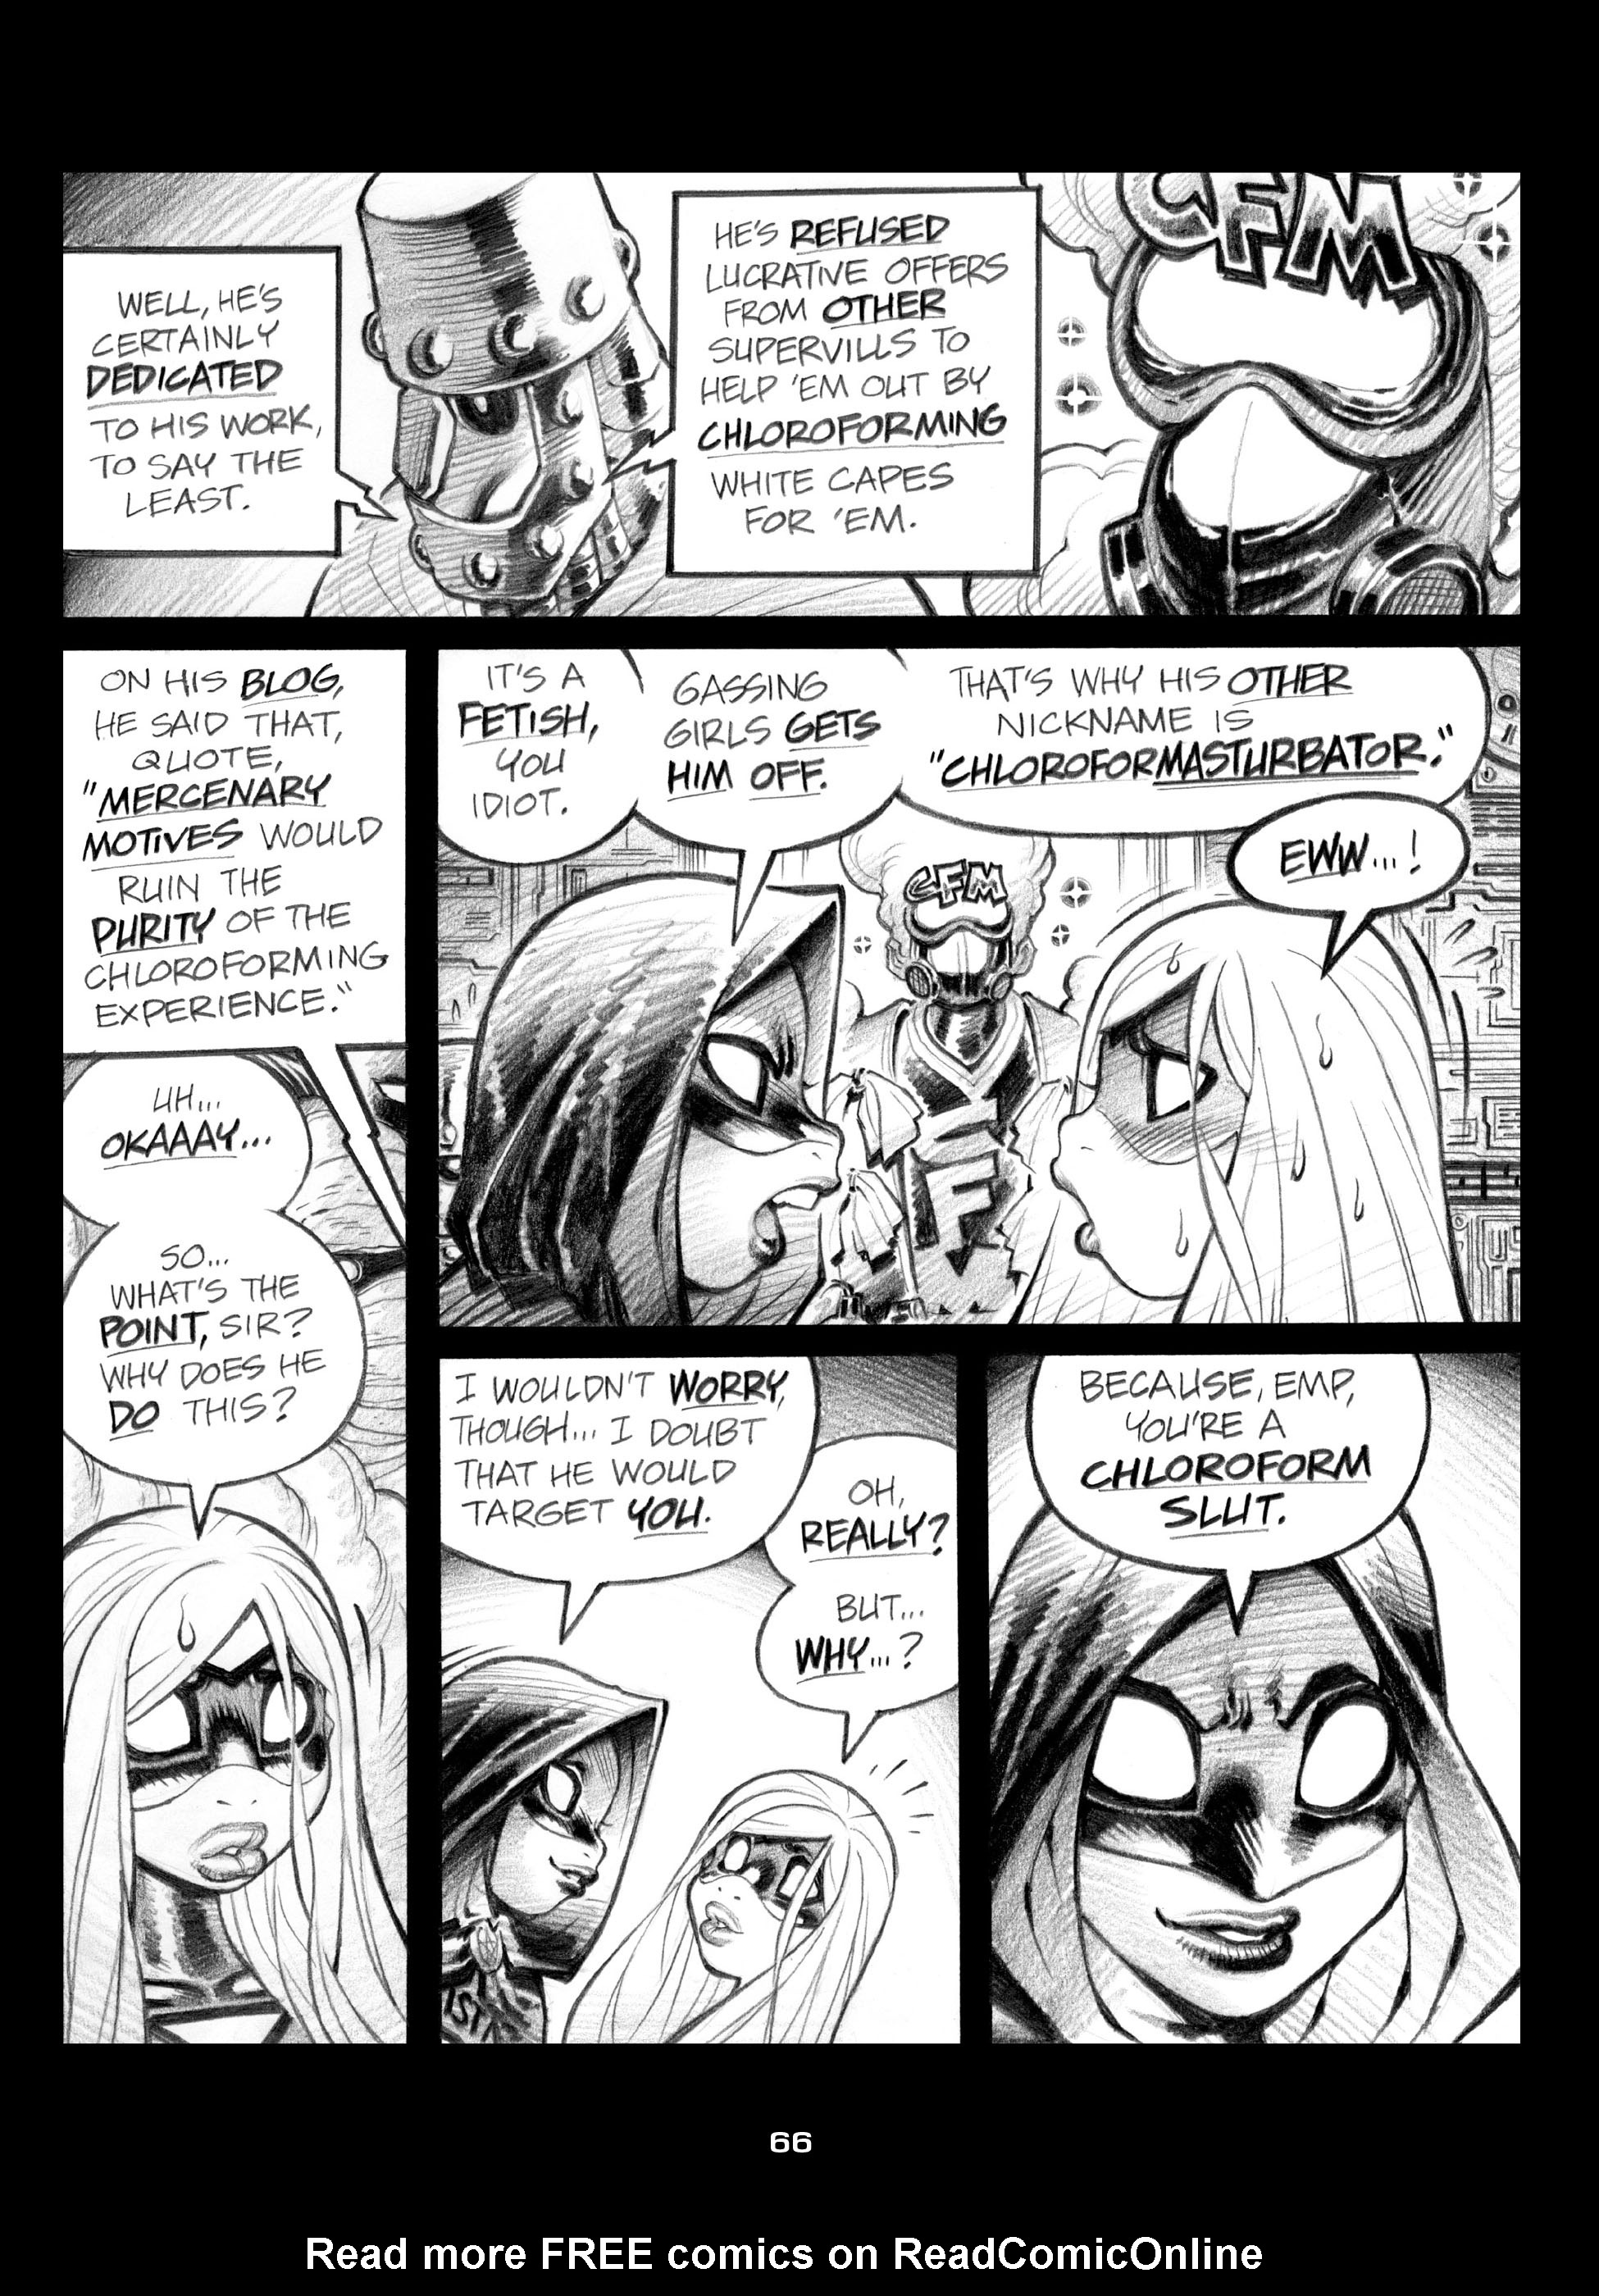 Read online Empowered comic -  Issue #3 - 66